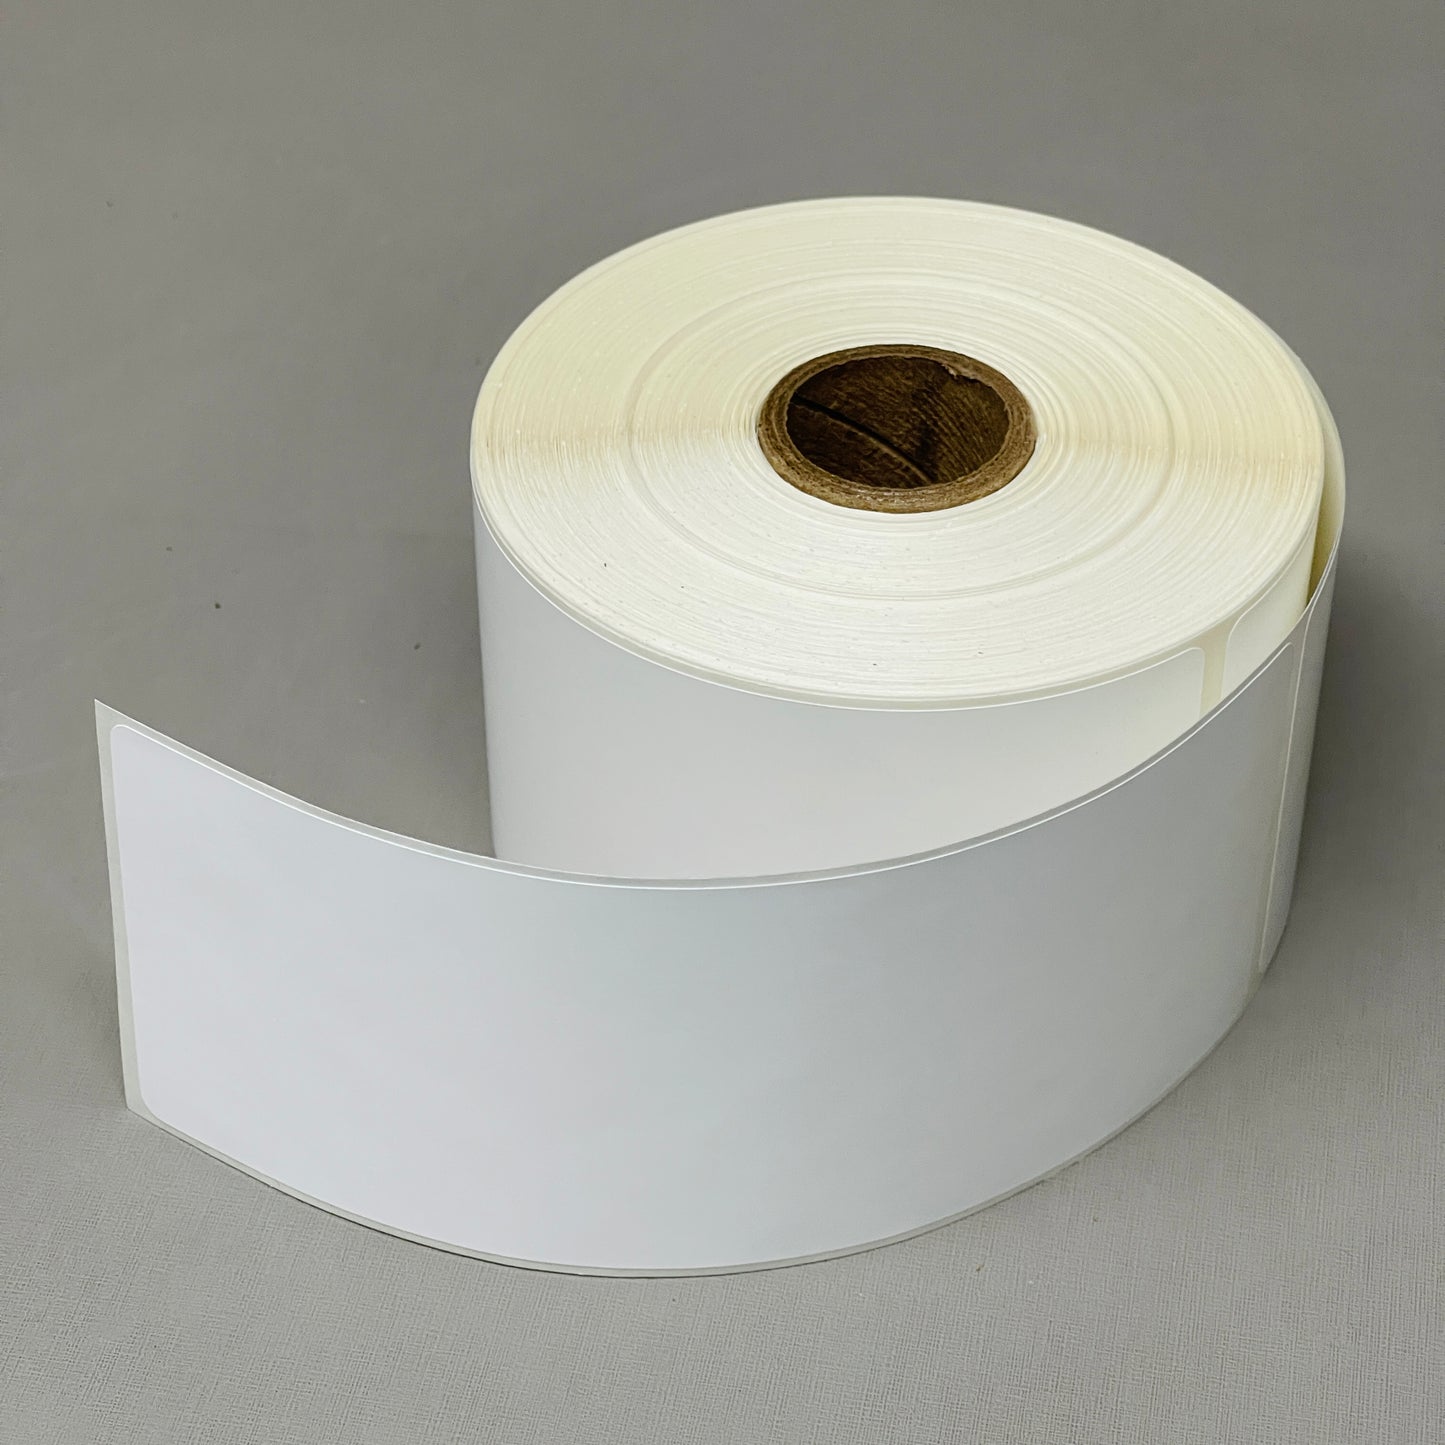 12-Pack VASNA TT Synthetic Thermal Transfer labels 250 /roll 2.25" x 6"